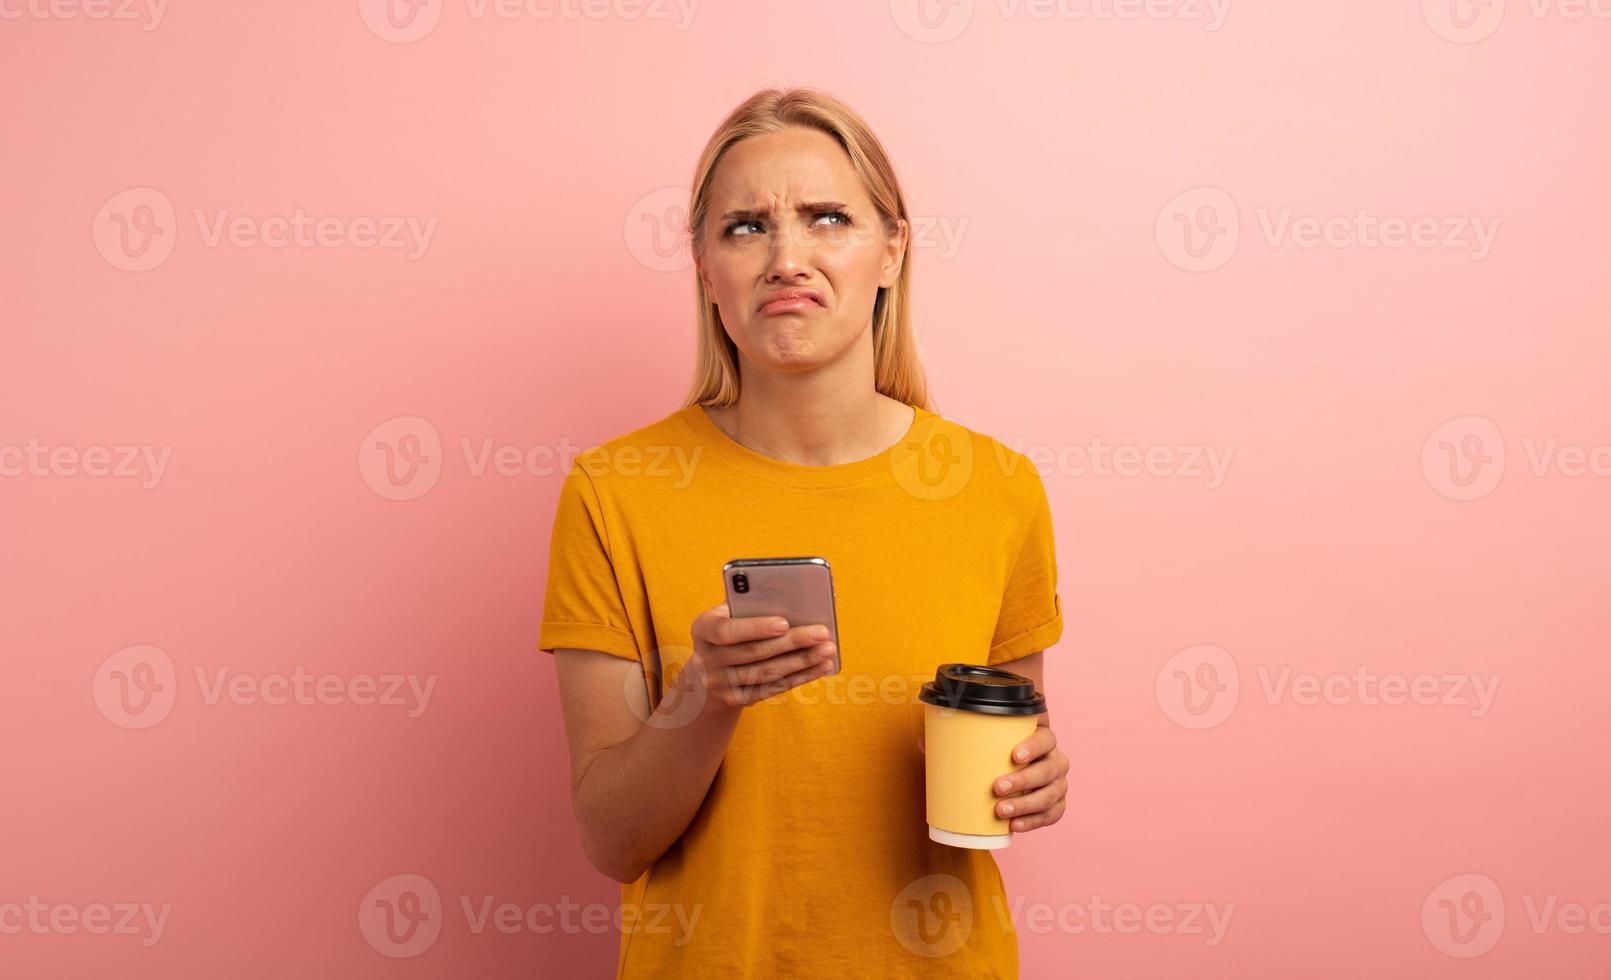 Blonde girl thinks about the right option. Yes or no. Confused and pensive expression. Pink background photo